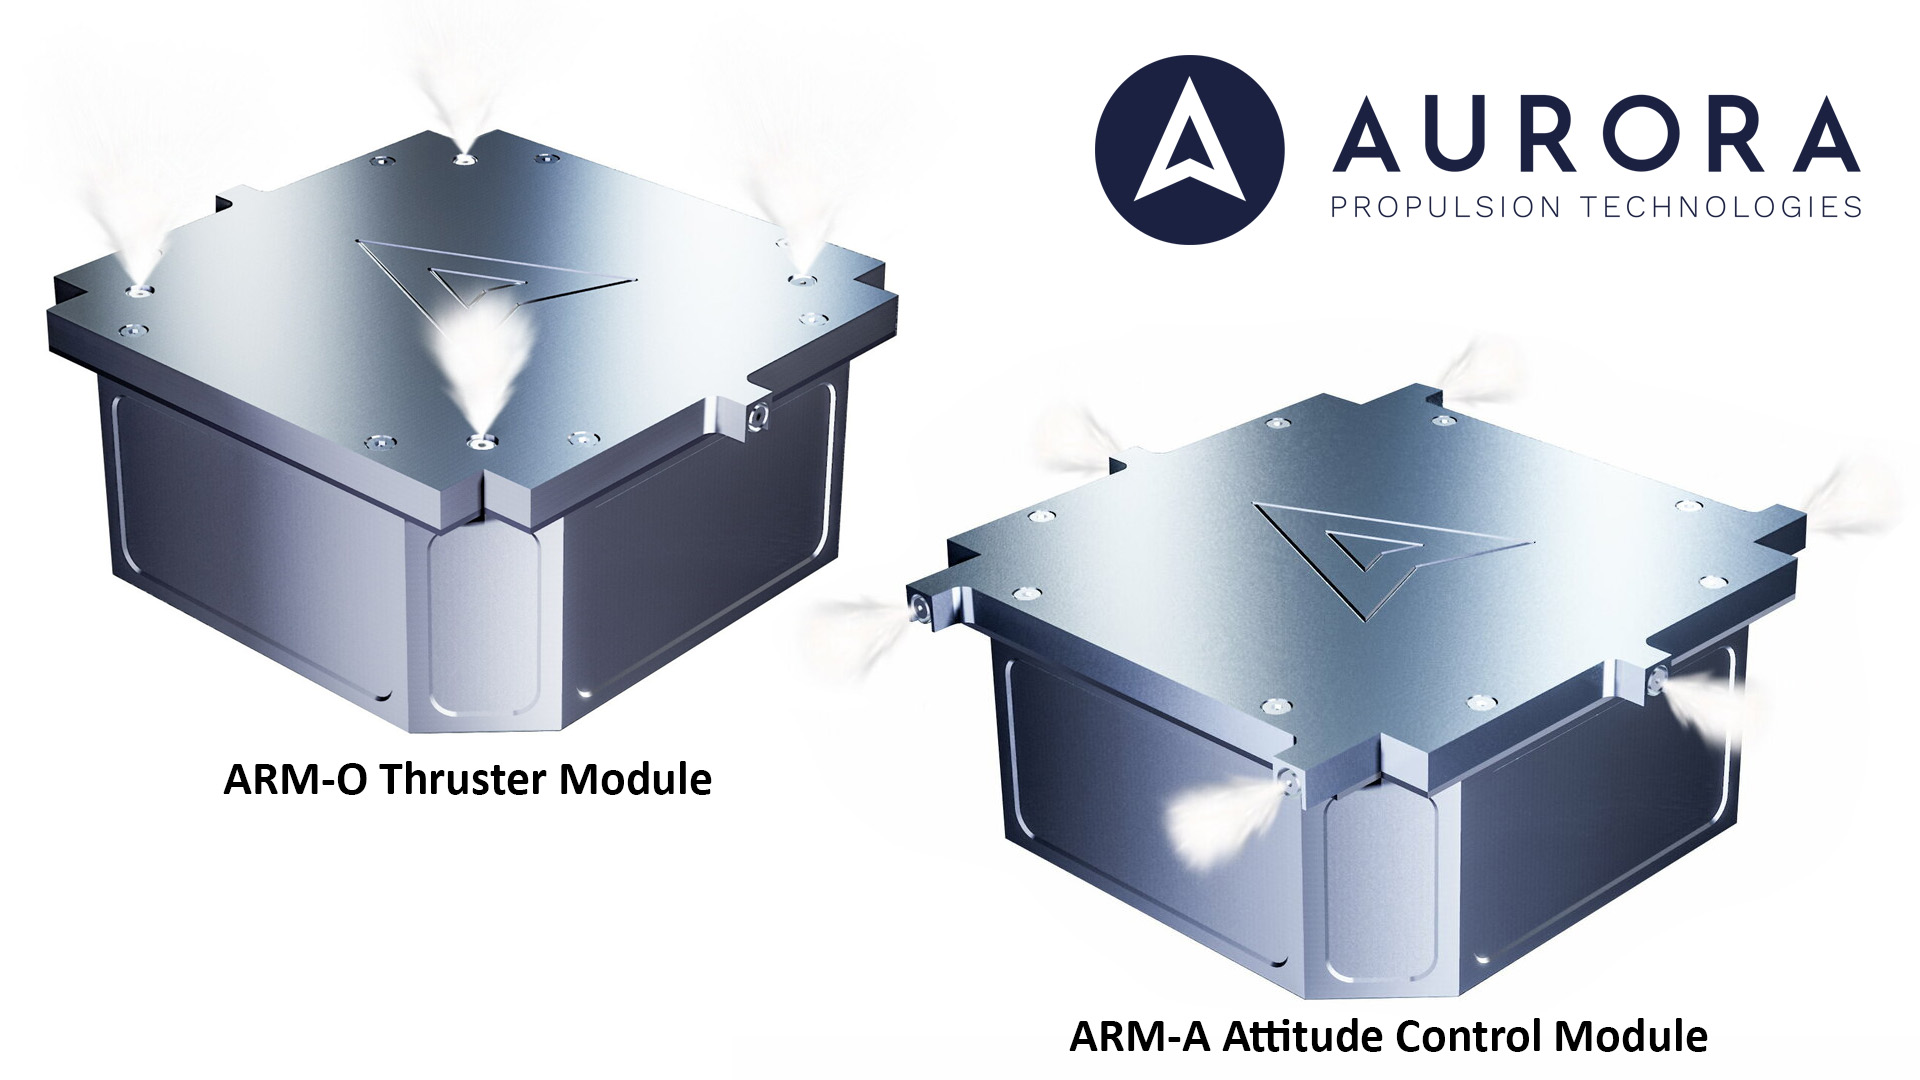 ResistoJet ARM-O and ARM-A modules from Aurora Propulsion